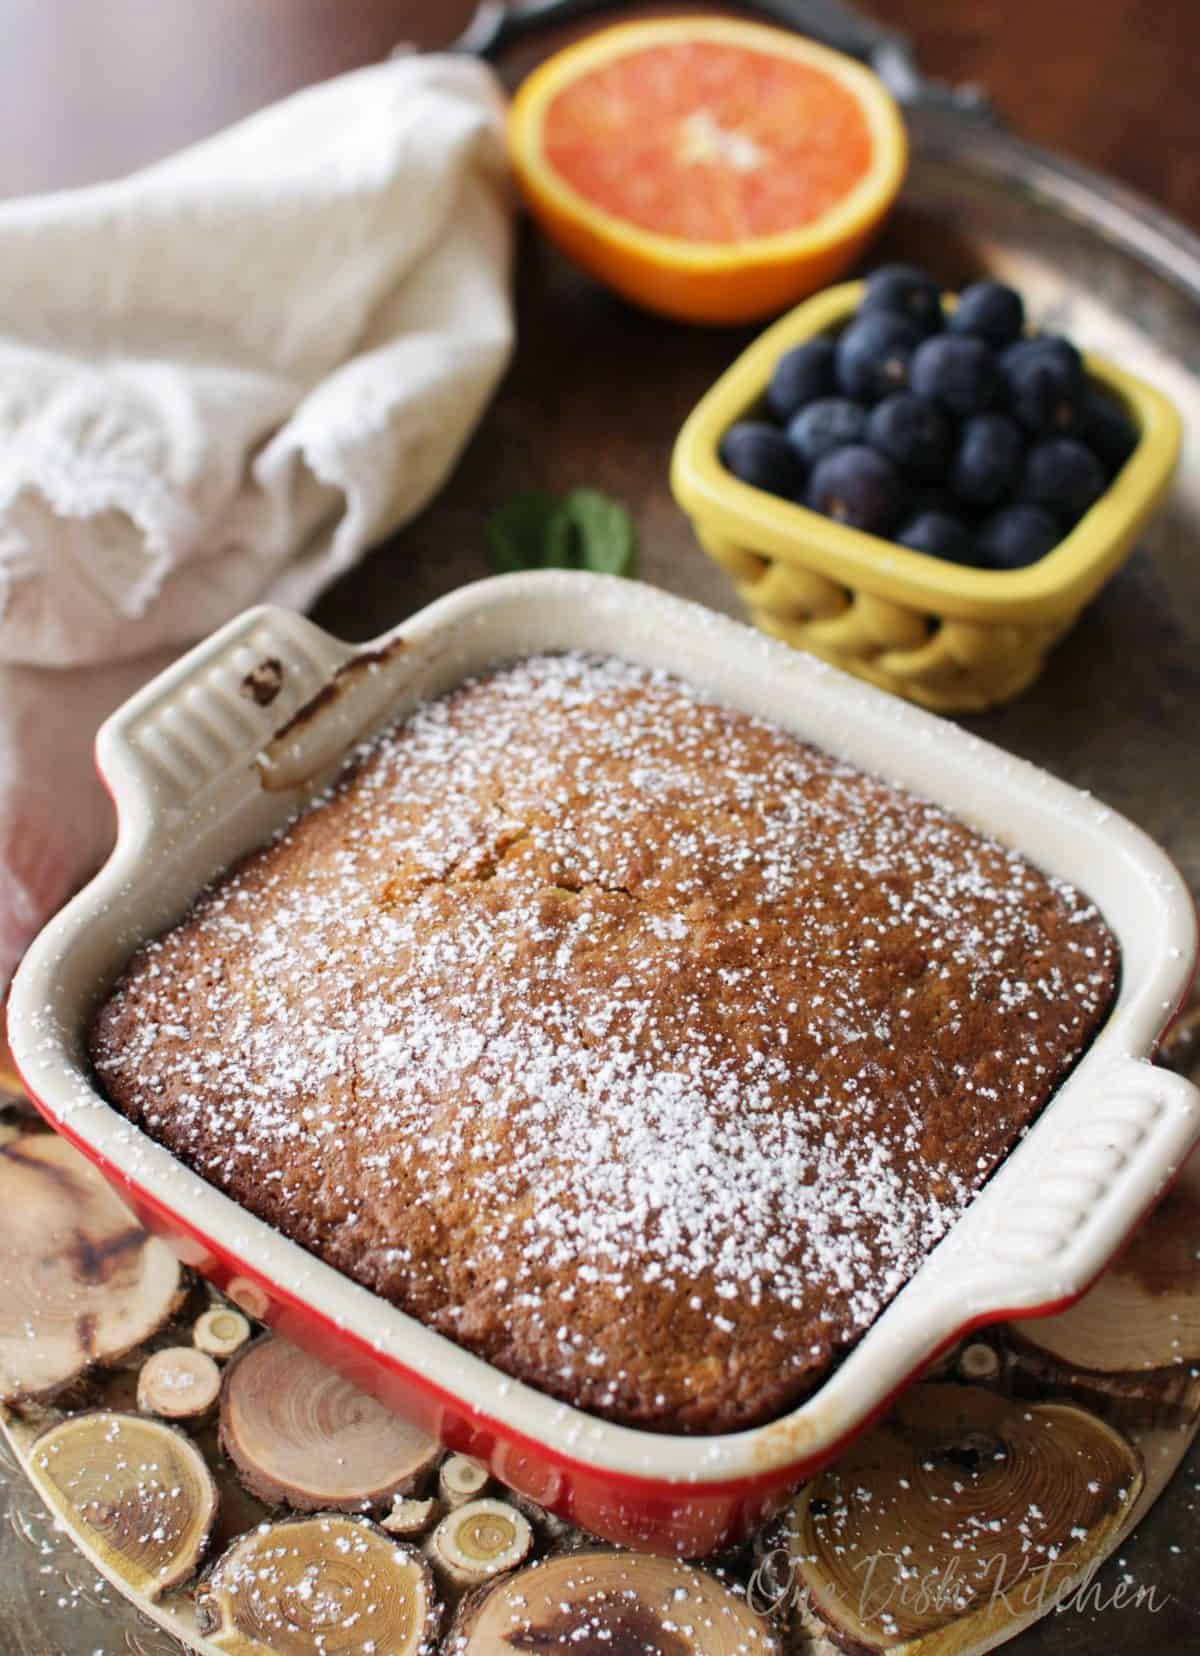 A mini oatmeal cake in a small baking dish topped with powdered sugar on a wooden trivet next to half an orange and a small bowl of blueberries all on a metal tray.